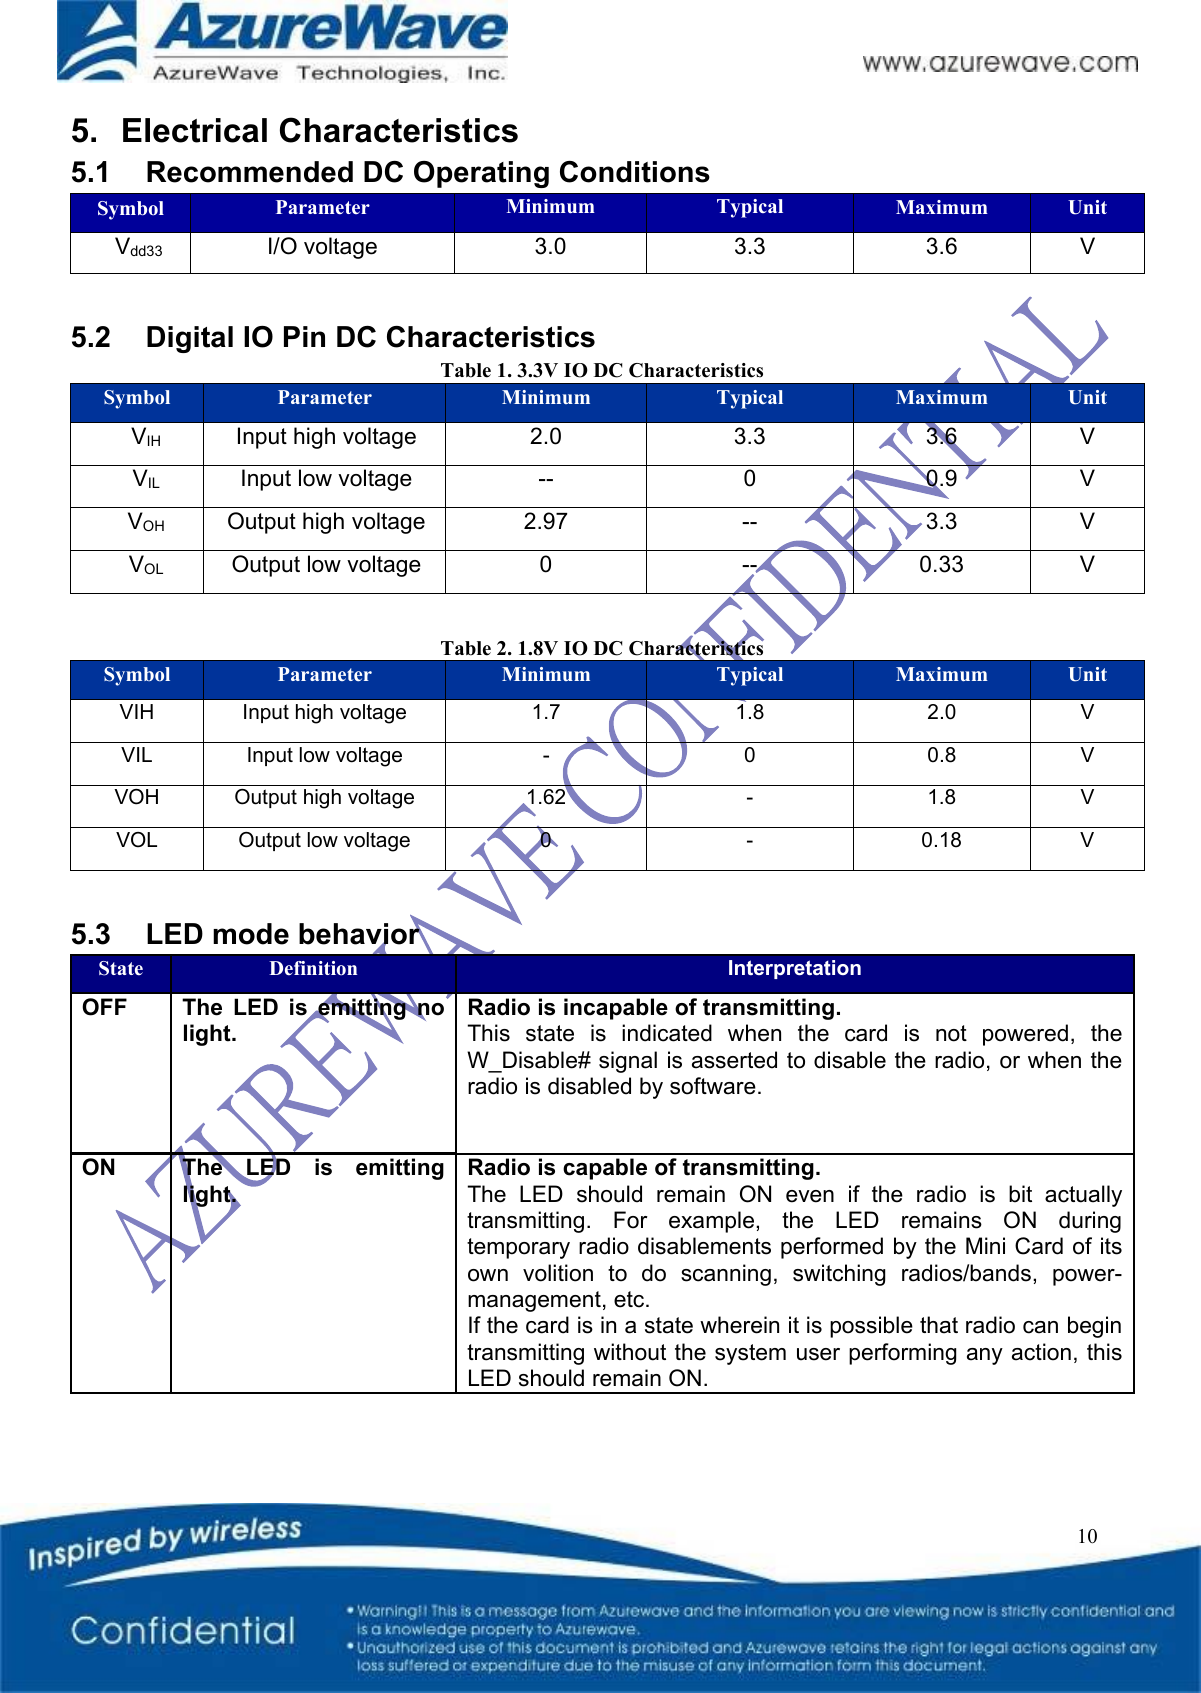   10 5.  Electrical Characteristics 5.1  Recommended DC Operating Conditions Symbol  Parameter  Minimum  Typical  Maximum  Unit Vdd33  I/O voltage  3.0  3.3  3.6  V  5.2  Digital IO Pin DC Characteristics Table 1. 3.3V IO DC Characteristics Symbol  Parameter  Minimum  Typical  Maximum  Unit VIH  Input high voltage  2.0  3.3  3.6  V VIL  Input low voltage  --  0  0.9  V VOH  Output high voltage  2.97  --  3.3  V VOL  Output low voltage  0  --  0.33  V  Table 2. 1.8V IO DC Characteristics Symbol  Parameter  Minimum  Typical  Maximum  Unit VIH  Input high voltage  1.7  1.8  2.0  V VIL  Input low voltage  -  0  0.8  V VOH  Output high voltage  1.62  -  1.8  V VOL  Output low voltage  0  -  0.18  V  5.3  LED mode behavior State Definition Interpretation OFF  The  LED  is  emitting  no light. Radio is incapable of transmitting. This  state  is  indicated  when  the  card  is  not  powered,  the W_Disable# signal is asserted to disable the radio, or when the radio is disabled by software. ON  The  LED  is  emitting light. Radio is capable of transmitting. The  LED  should  remain  ON  even  if  the  radio  is  bit  actually transmitting.  For  example,  the  LED  remains  ON  during temporary radio disablements performed by the Mini Card of its own  volition  to  do  scanning,  switching  radios/bands,  power-management, etc. If the card is in a state wherein it is possible that radio can begin transmitting without the system user performing any action, this LED should remain ON.   